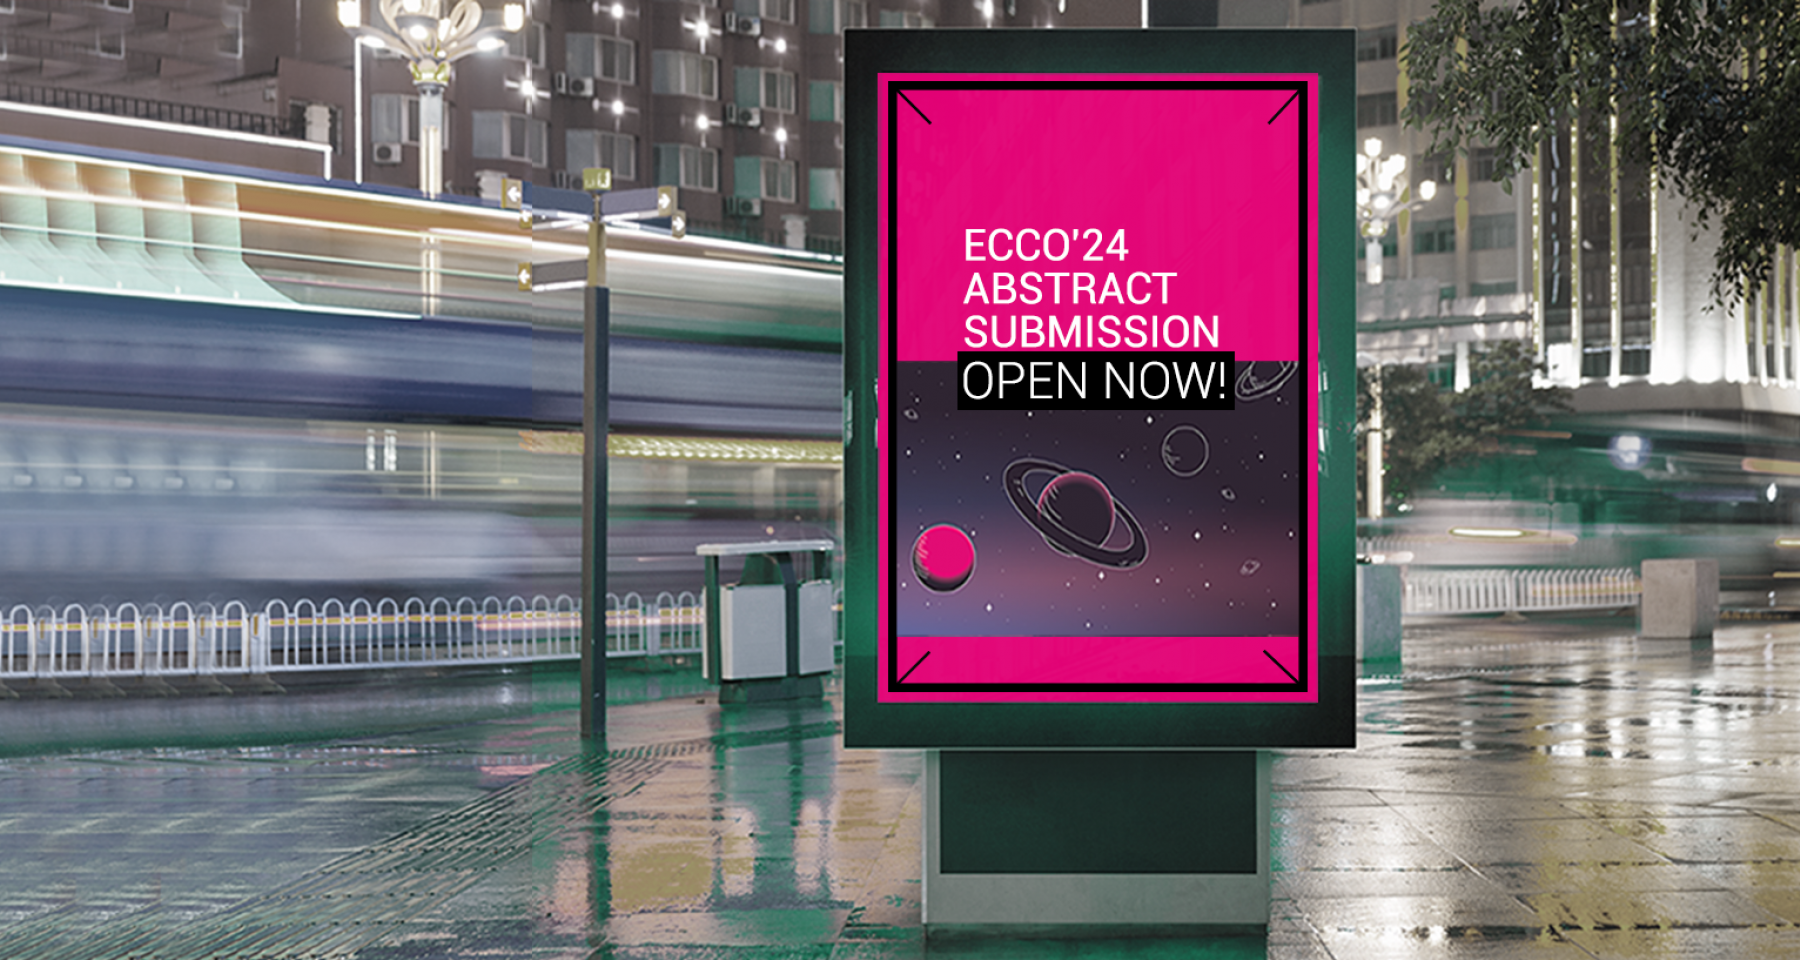 Abstracts submission now open for ECCO'24!